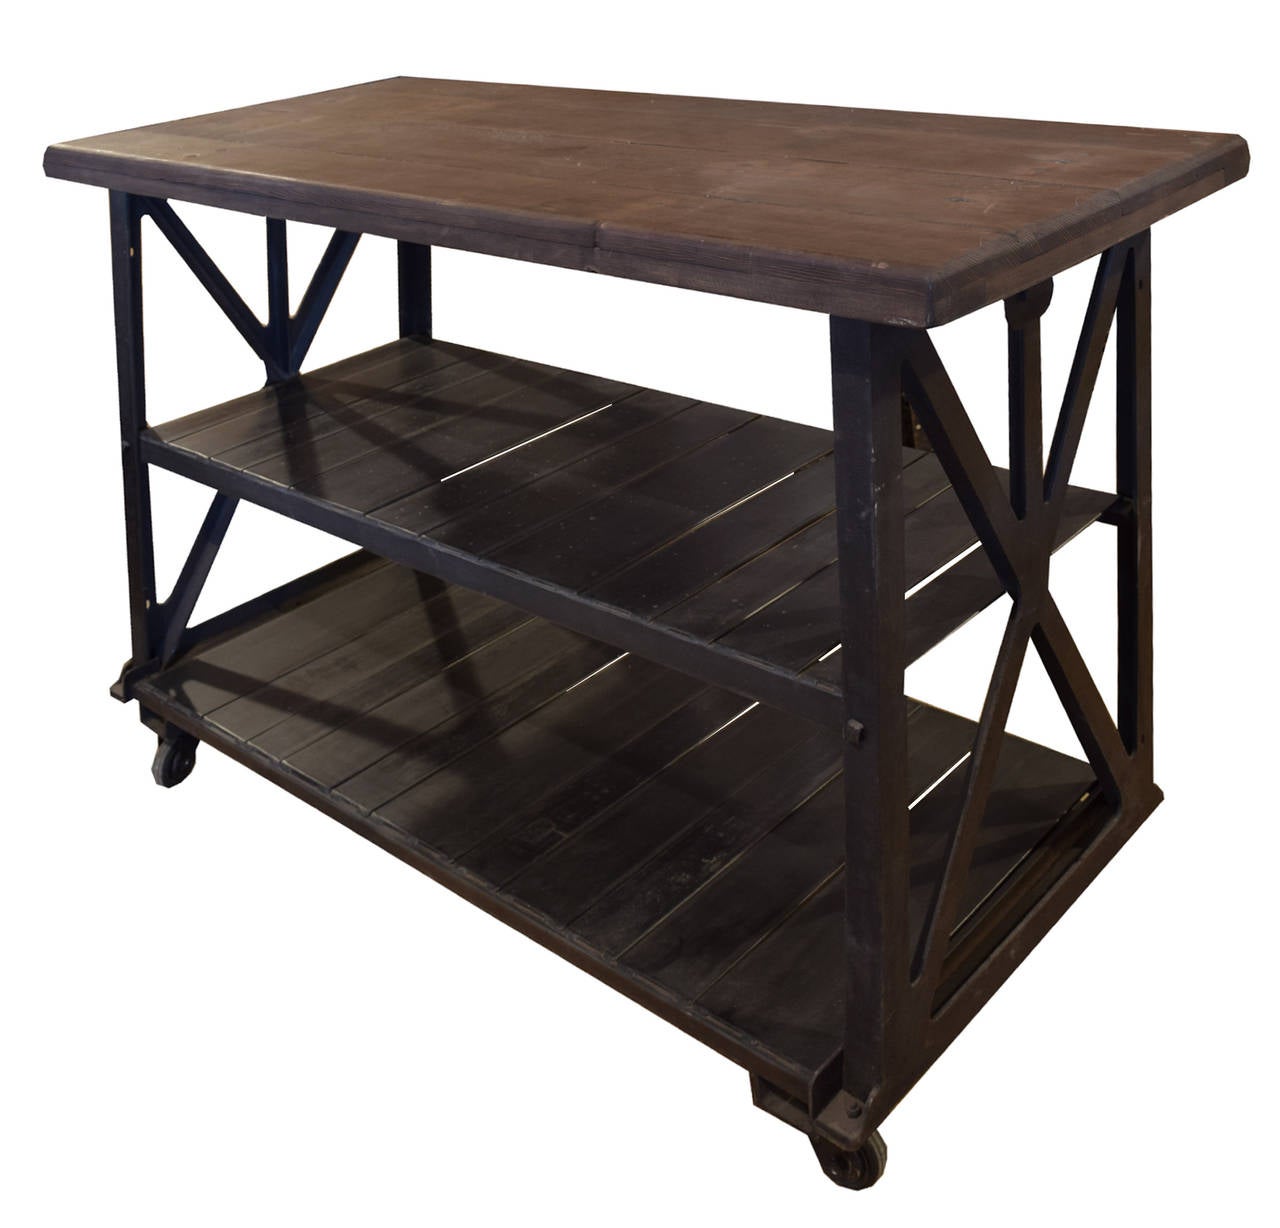 An American Industrial table with a metal frame with two shelves, a wood top and iron casters.